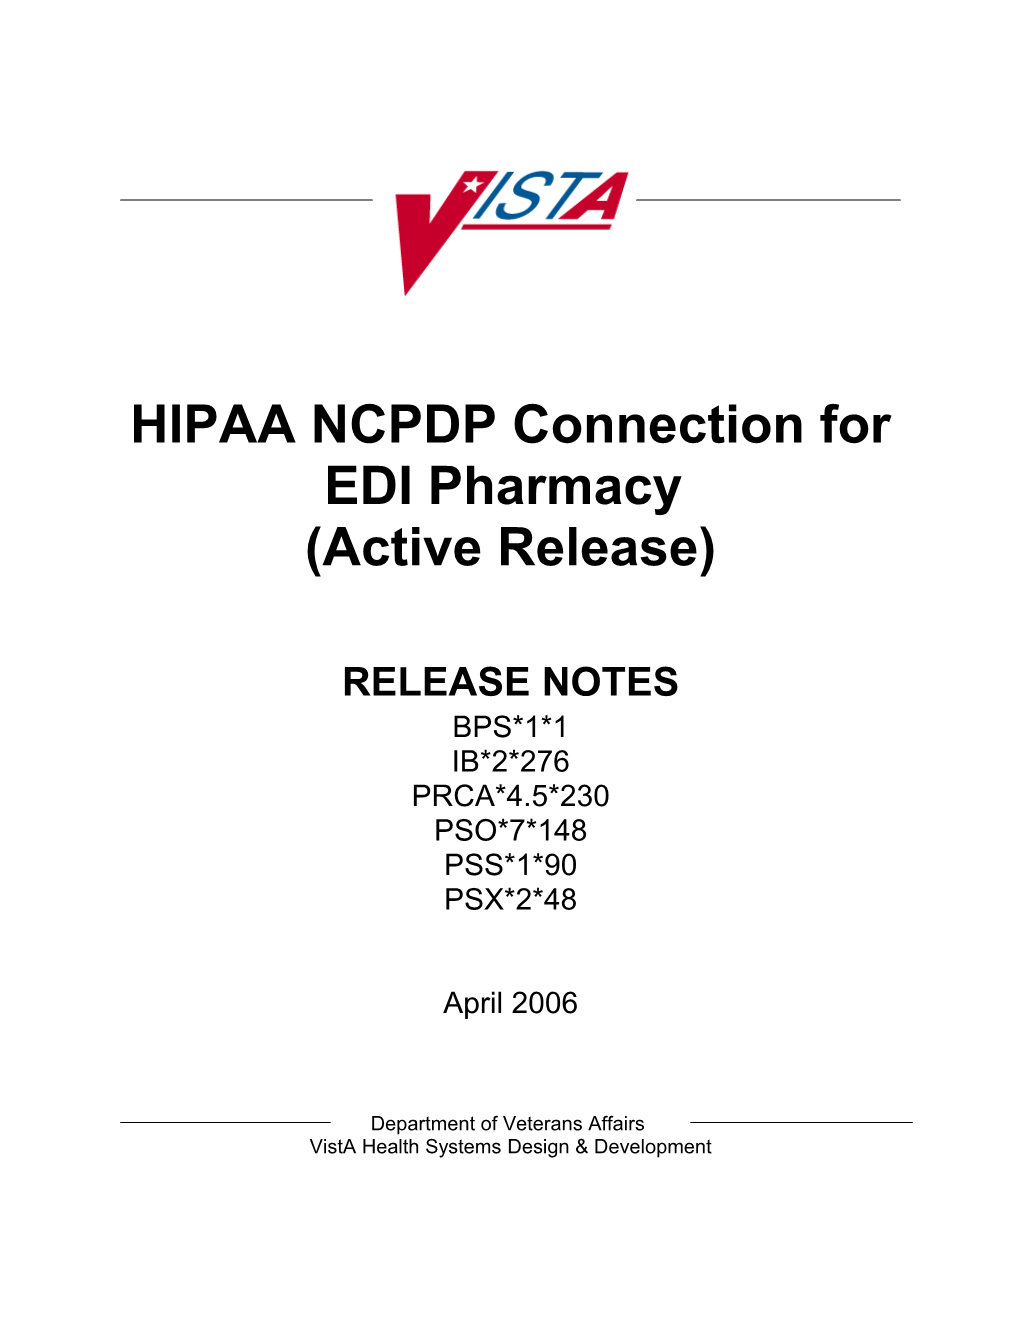 HIPAA NCPDP Connection for EDI Pharmacy (Active Release)